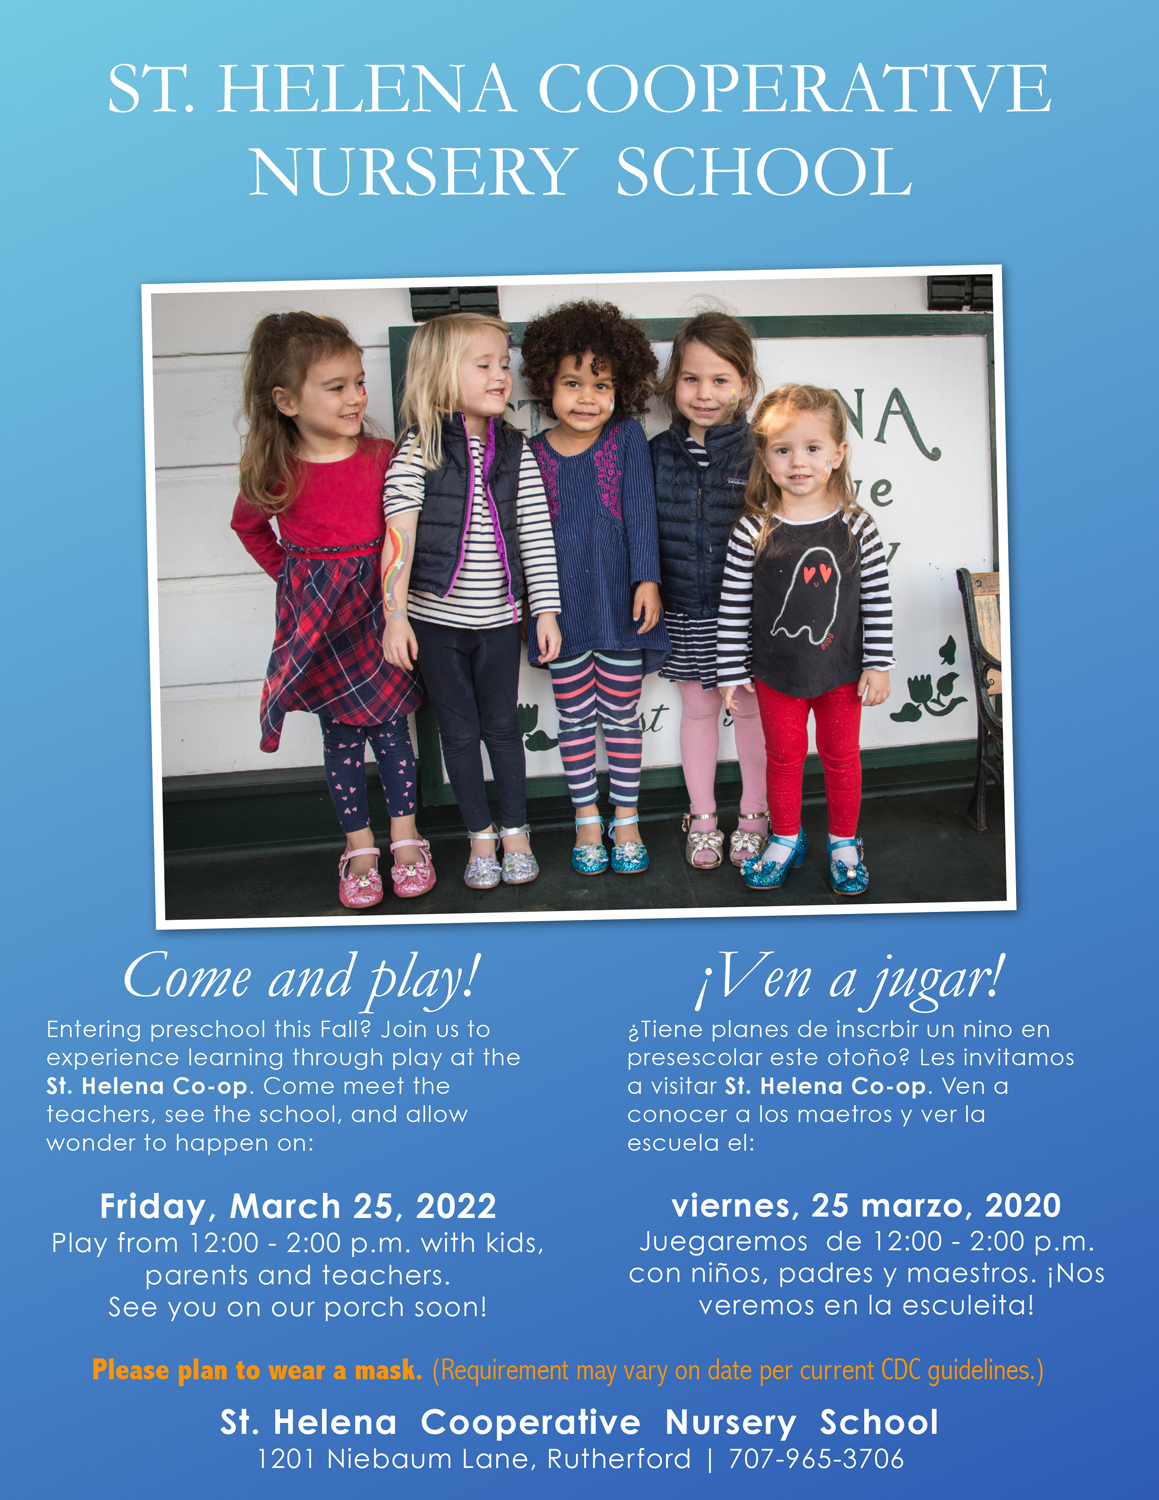 St. Helena Cooperative Nursery School Open House - Friday March 25th